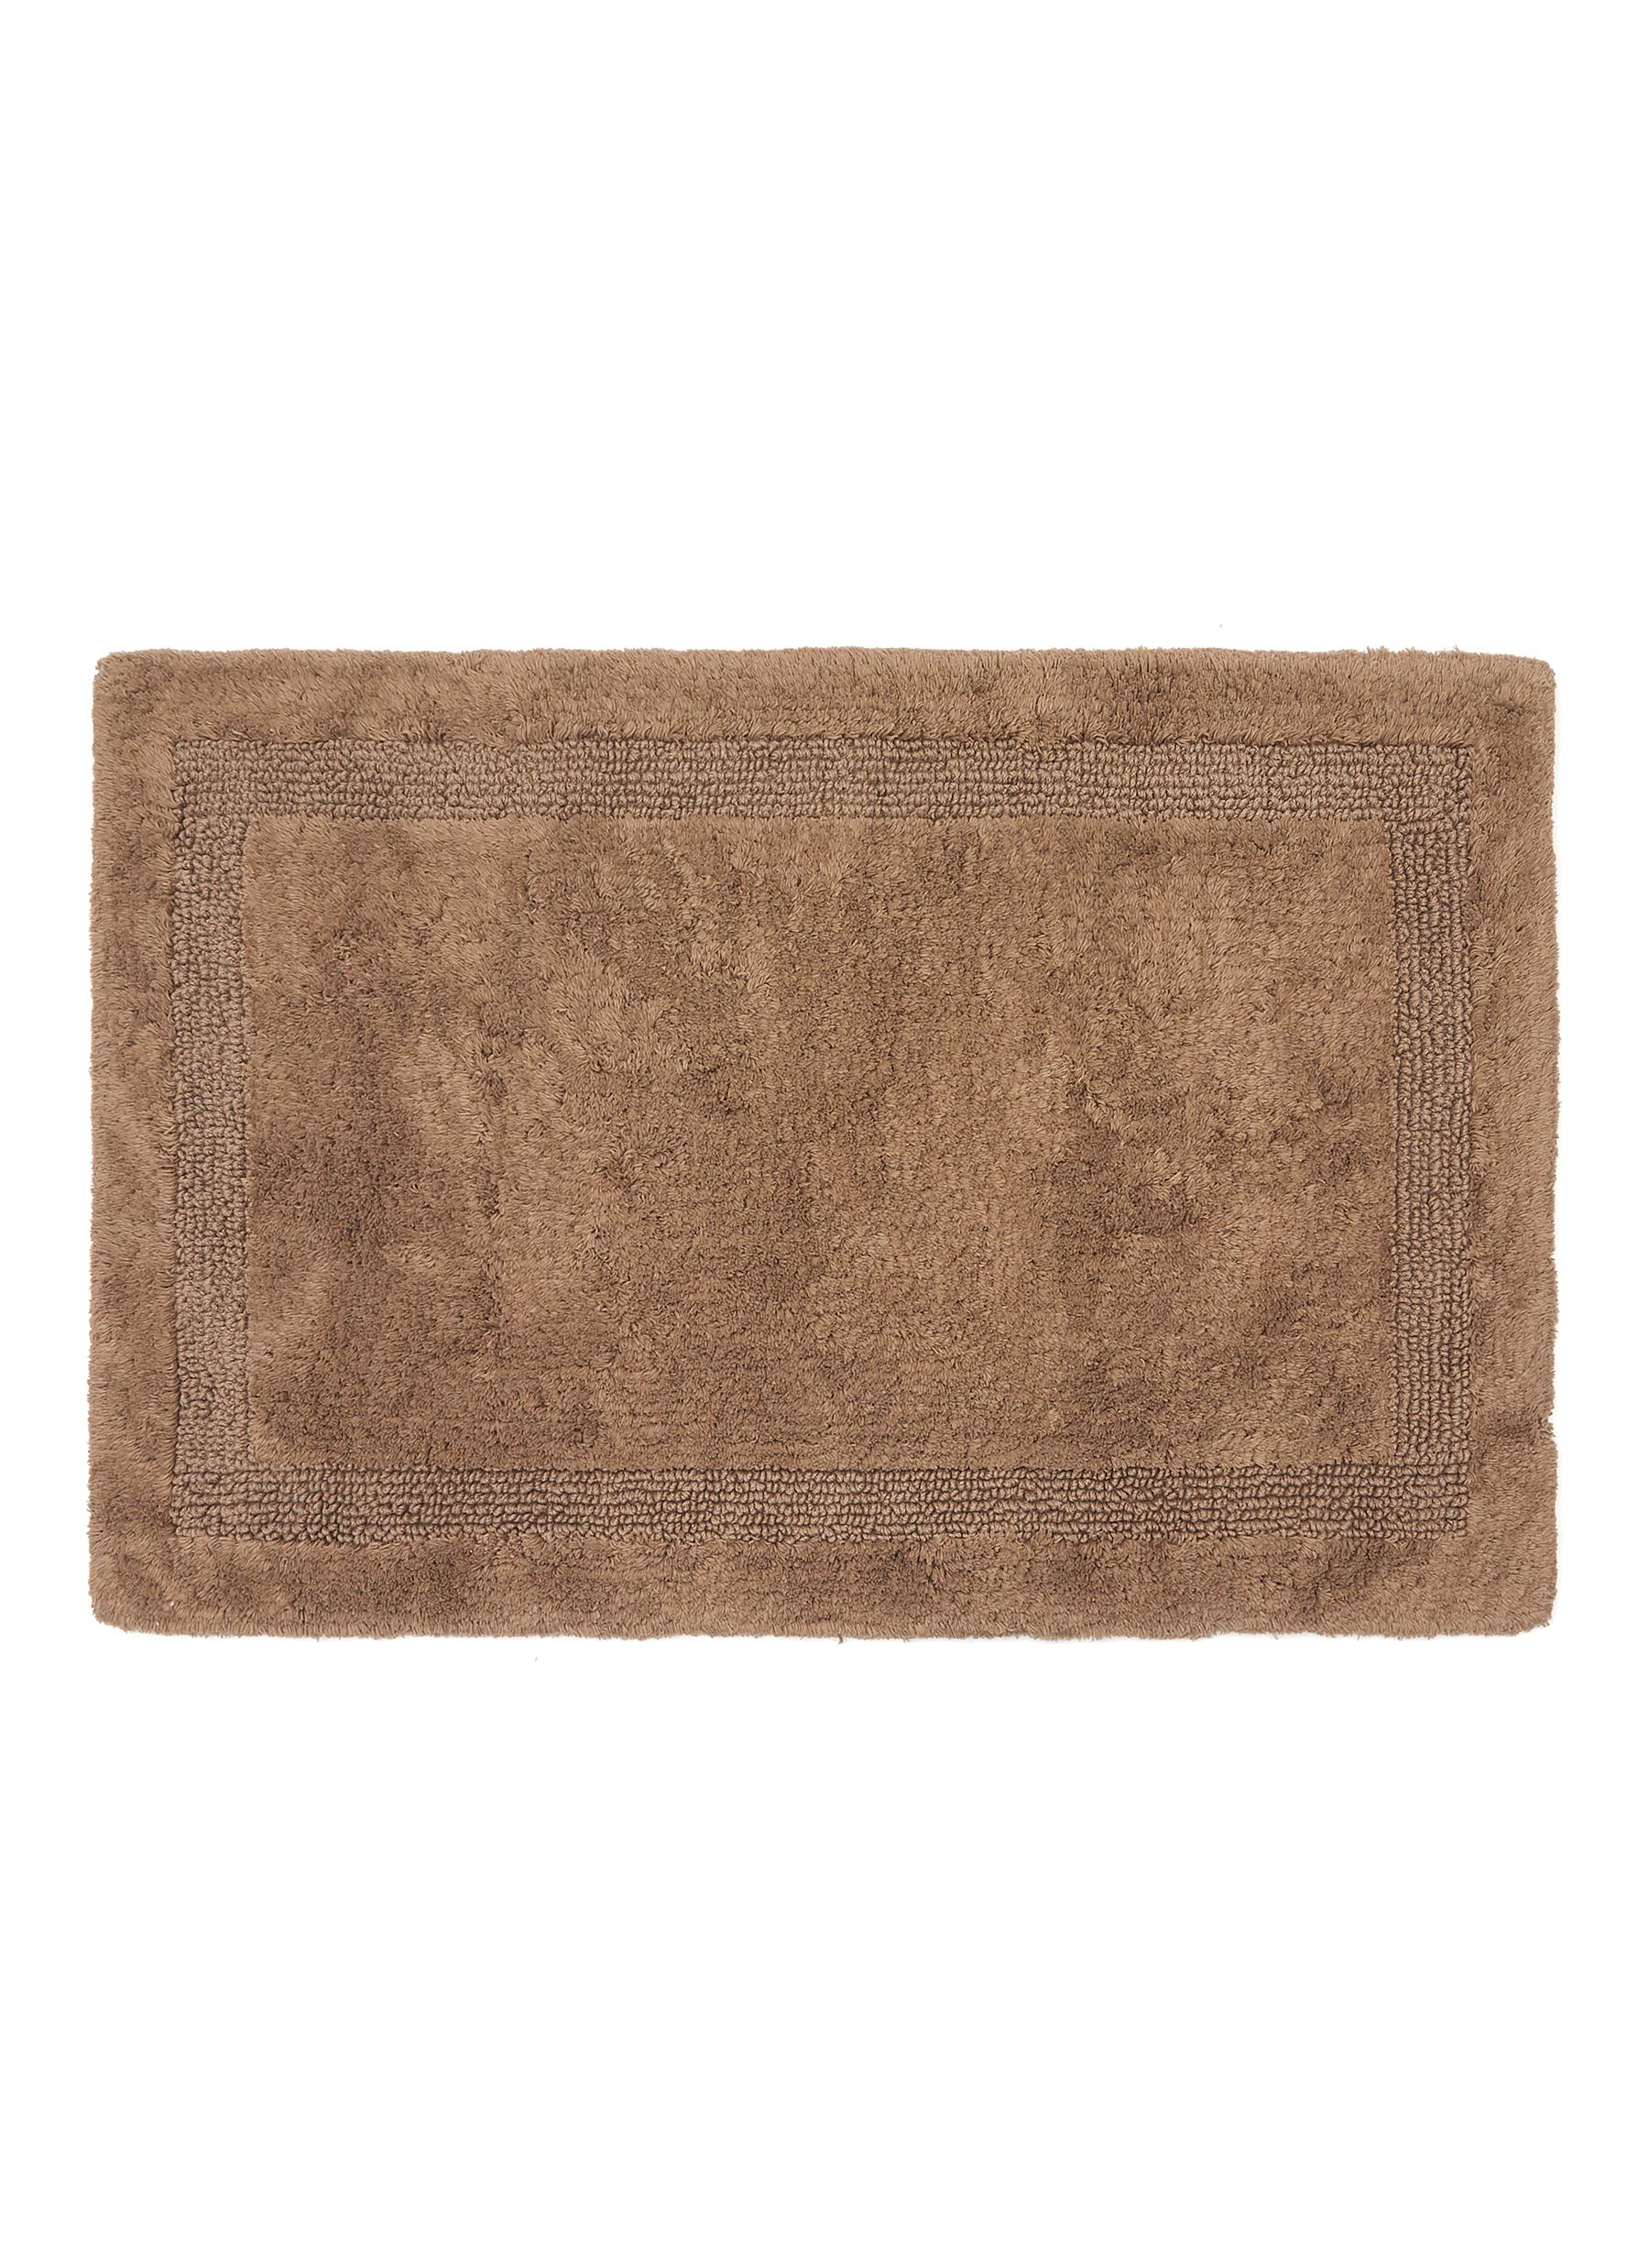 Abyss Super Pile Small Reversible Bath Mat - Funghi In Brown